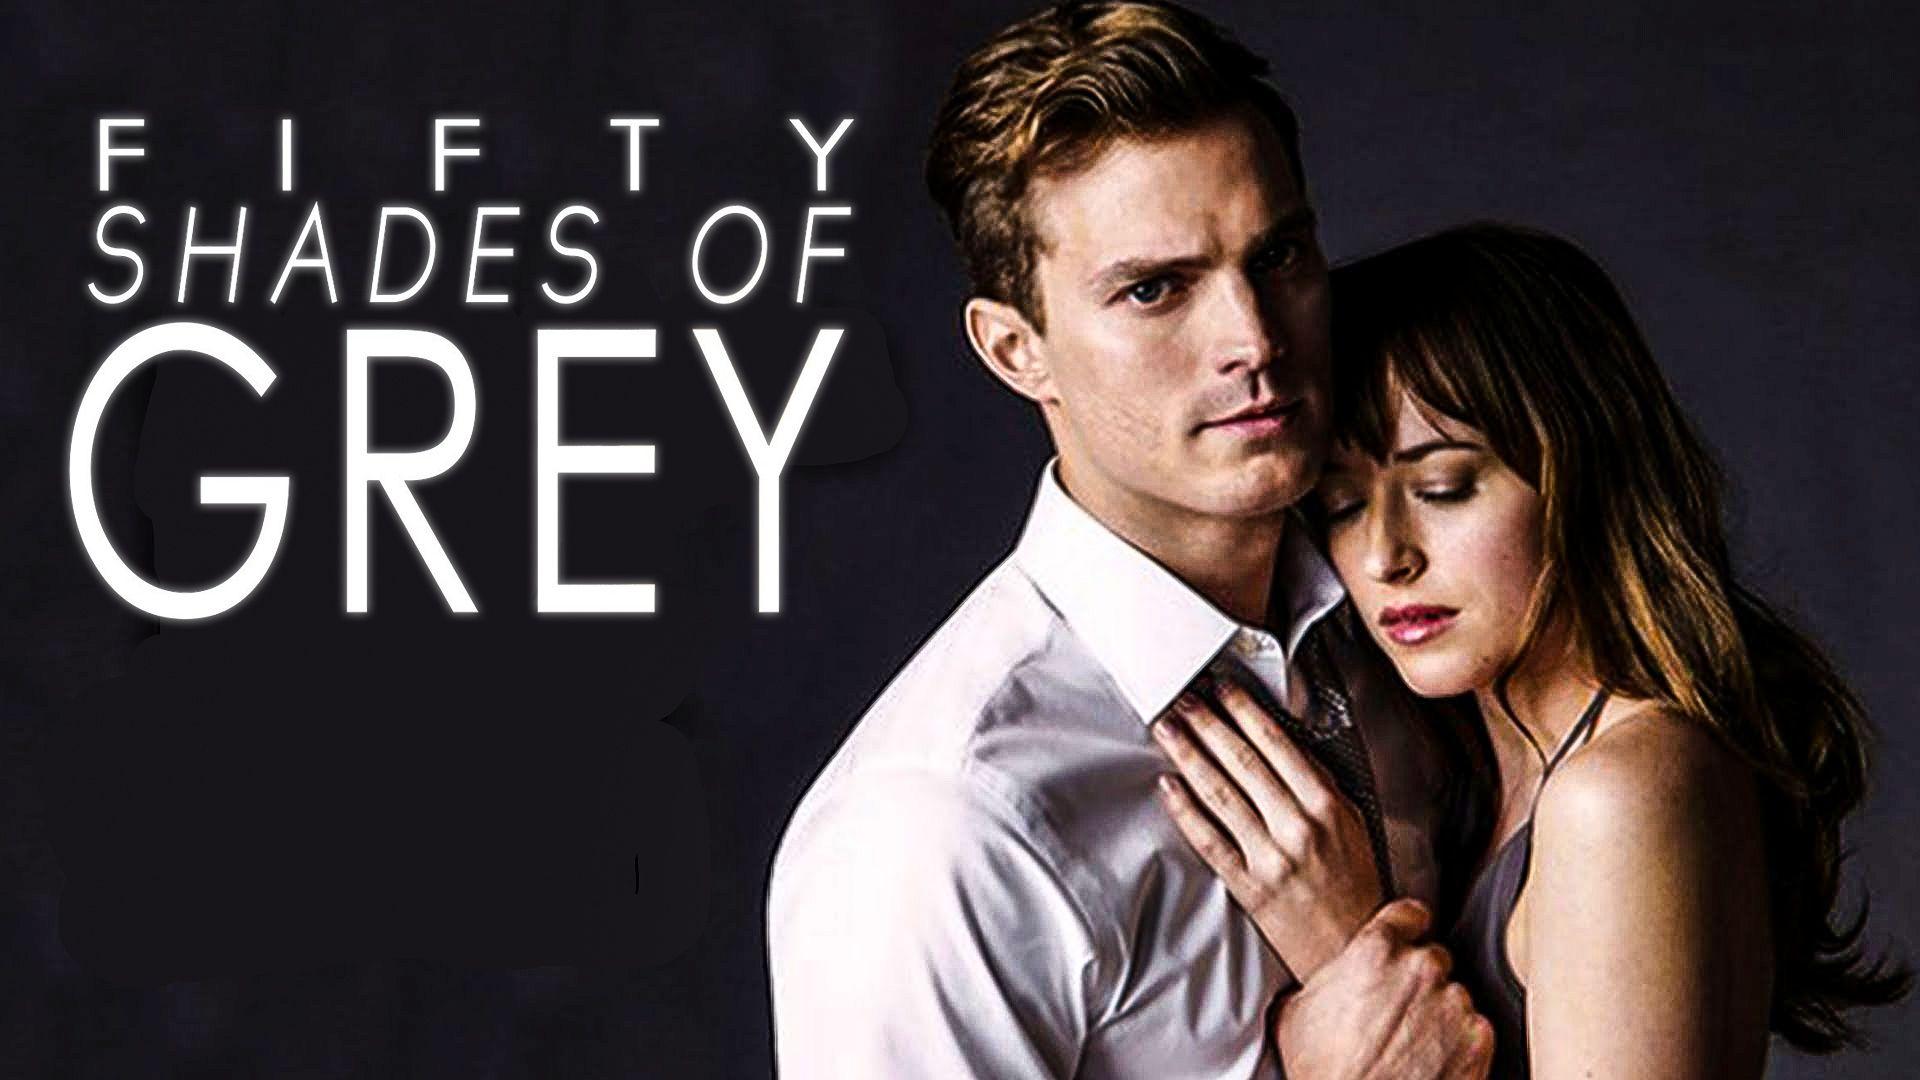 30+ Best HD Fifty Shades Of Grey Wallpapers.